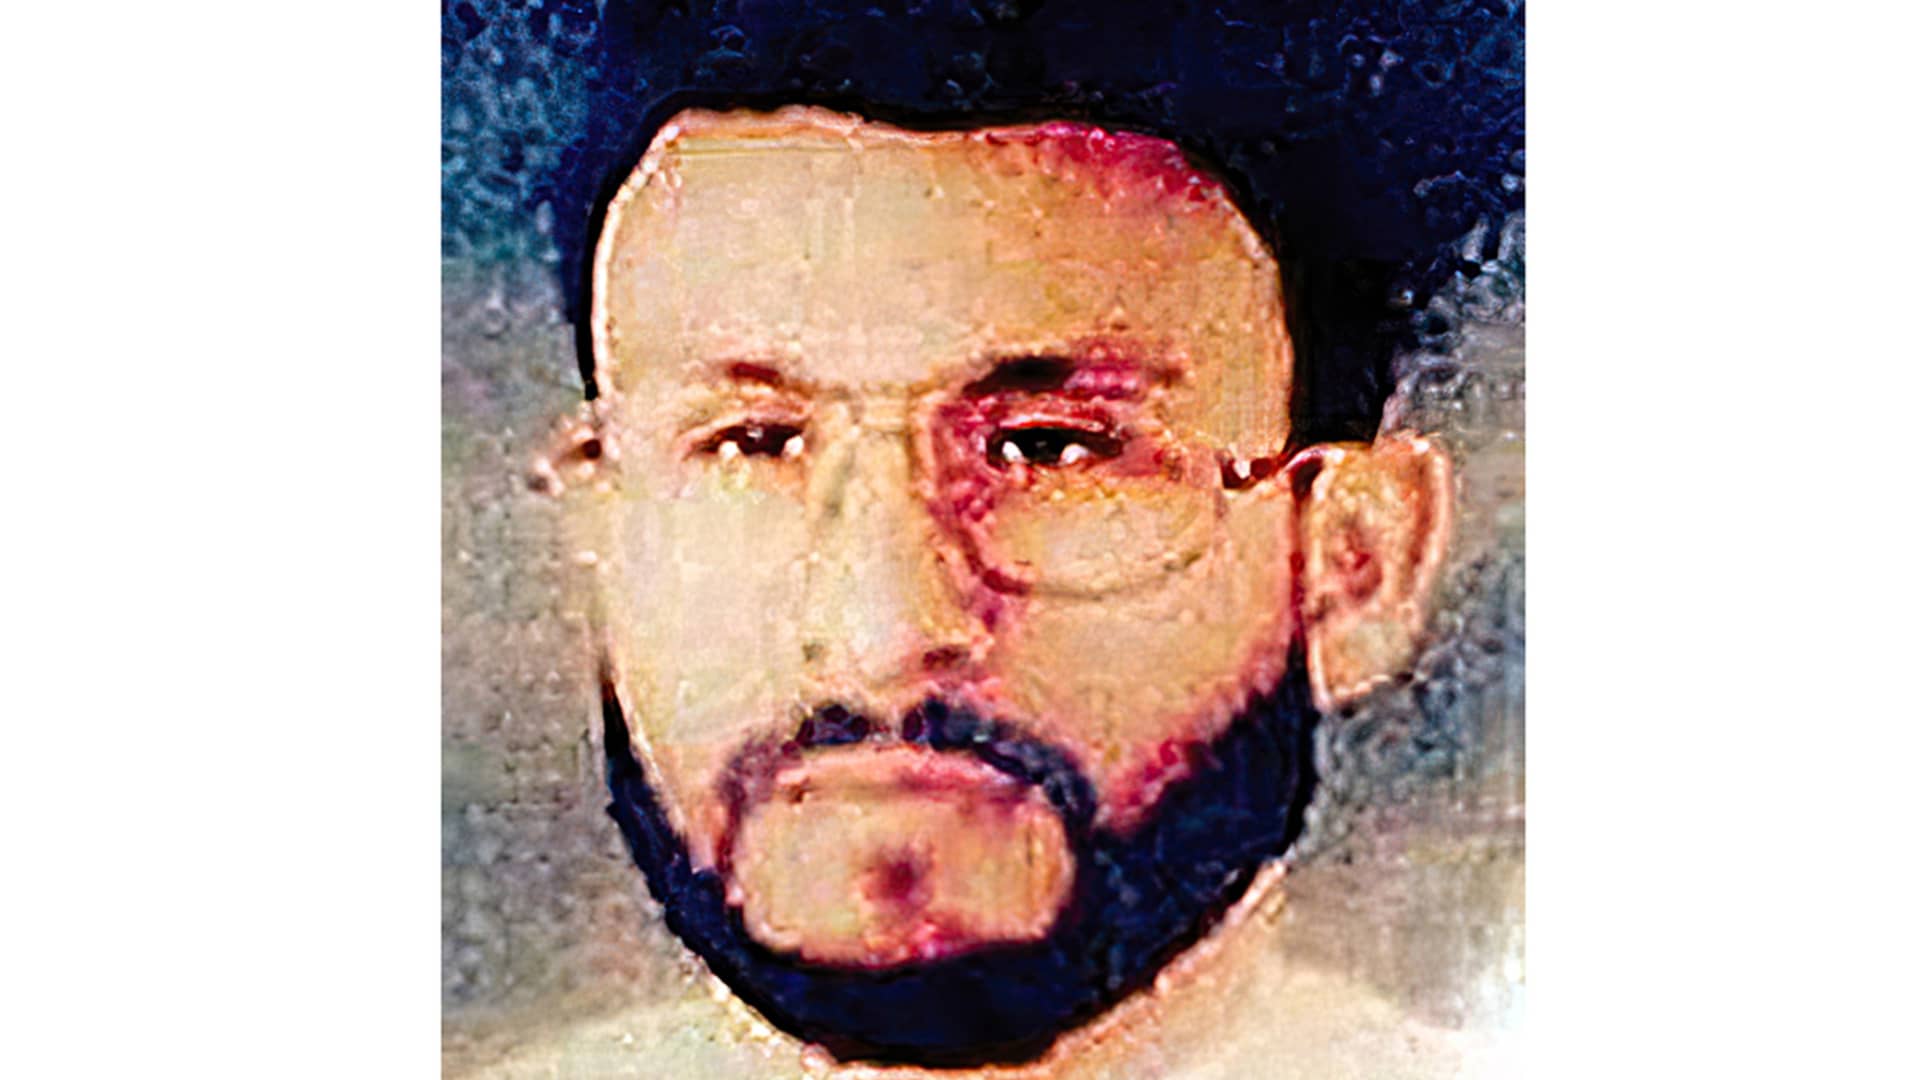 This undated file photo provided by U.S. Central Command, shows Abu Zubaydah, date and location unknown. The Supreme Court is hearing arguments about the government's ability to keep what it says are state secrets from a man tortured by the CIA following 9/11 and now held at the Guantanamo Bay detention center. At the center of the case being heard Wednesday is whether Abu Zubaydah can get information related to his detention.